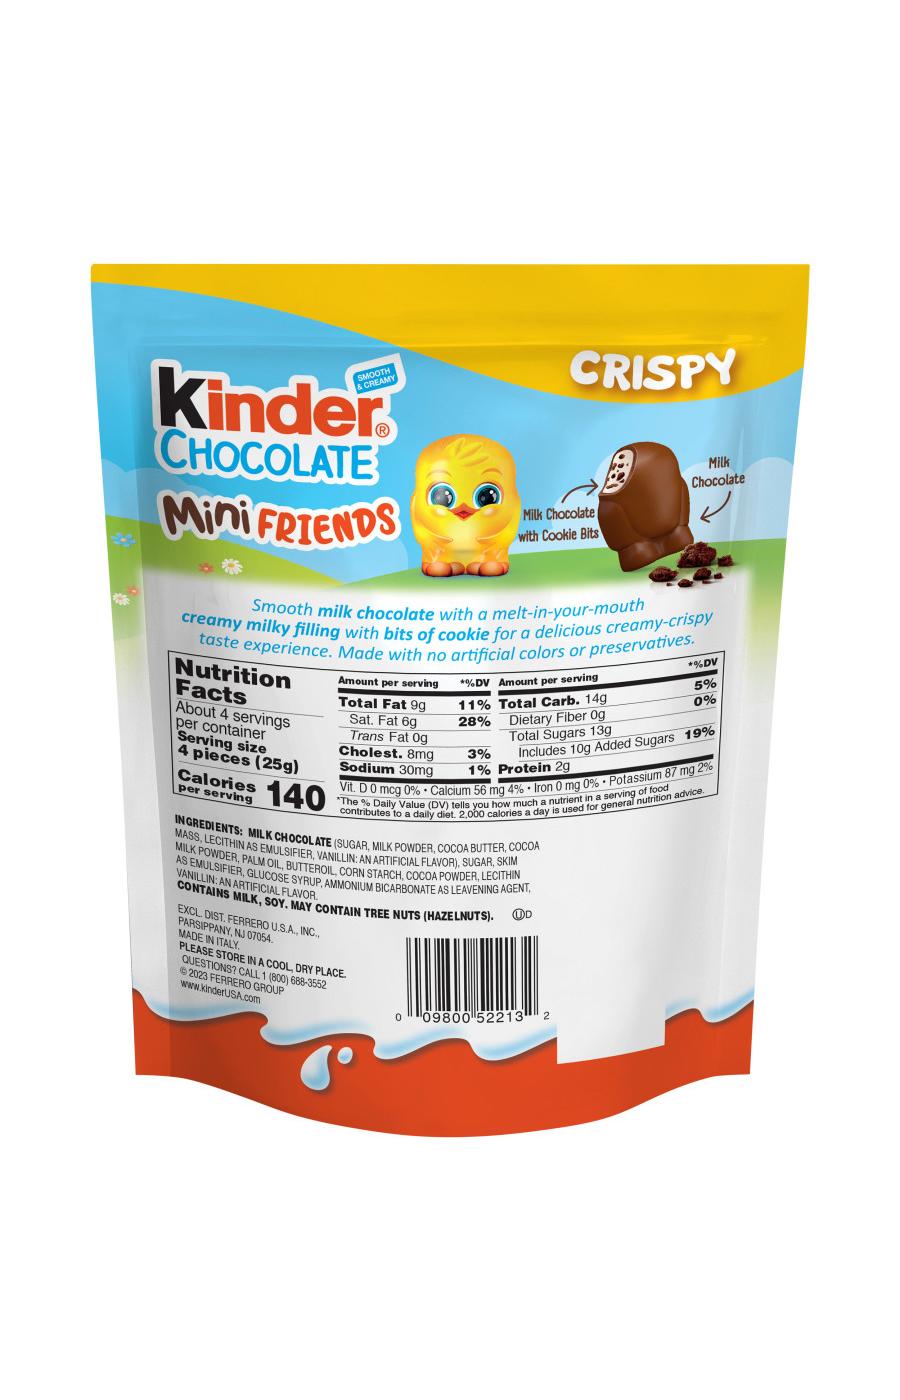 Kinder Crispy Chocolate Mini Friends Easter Candy; image 2 of 2